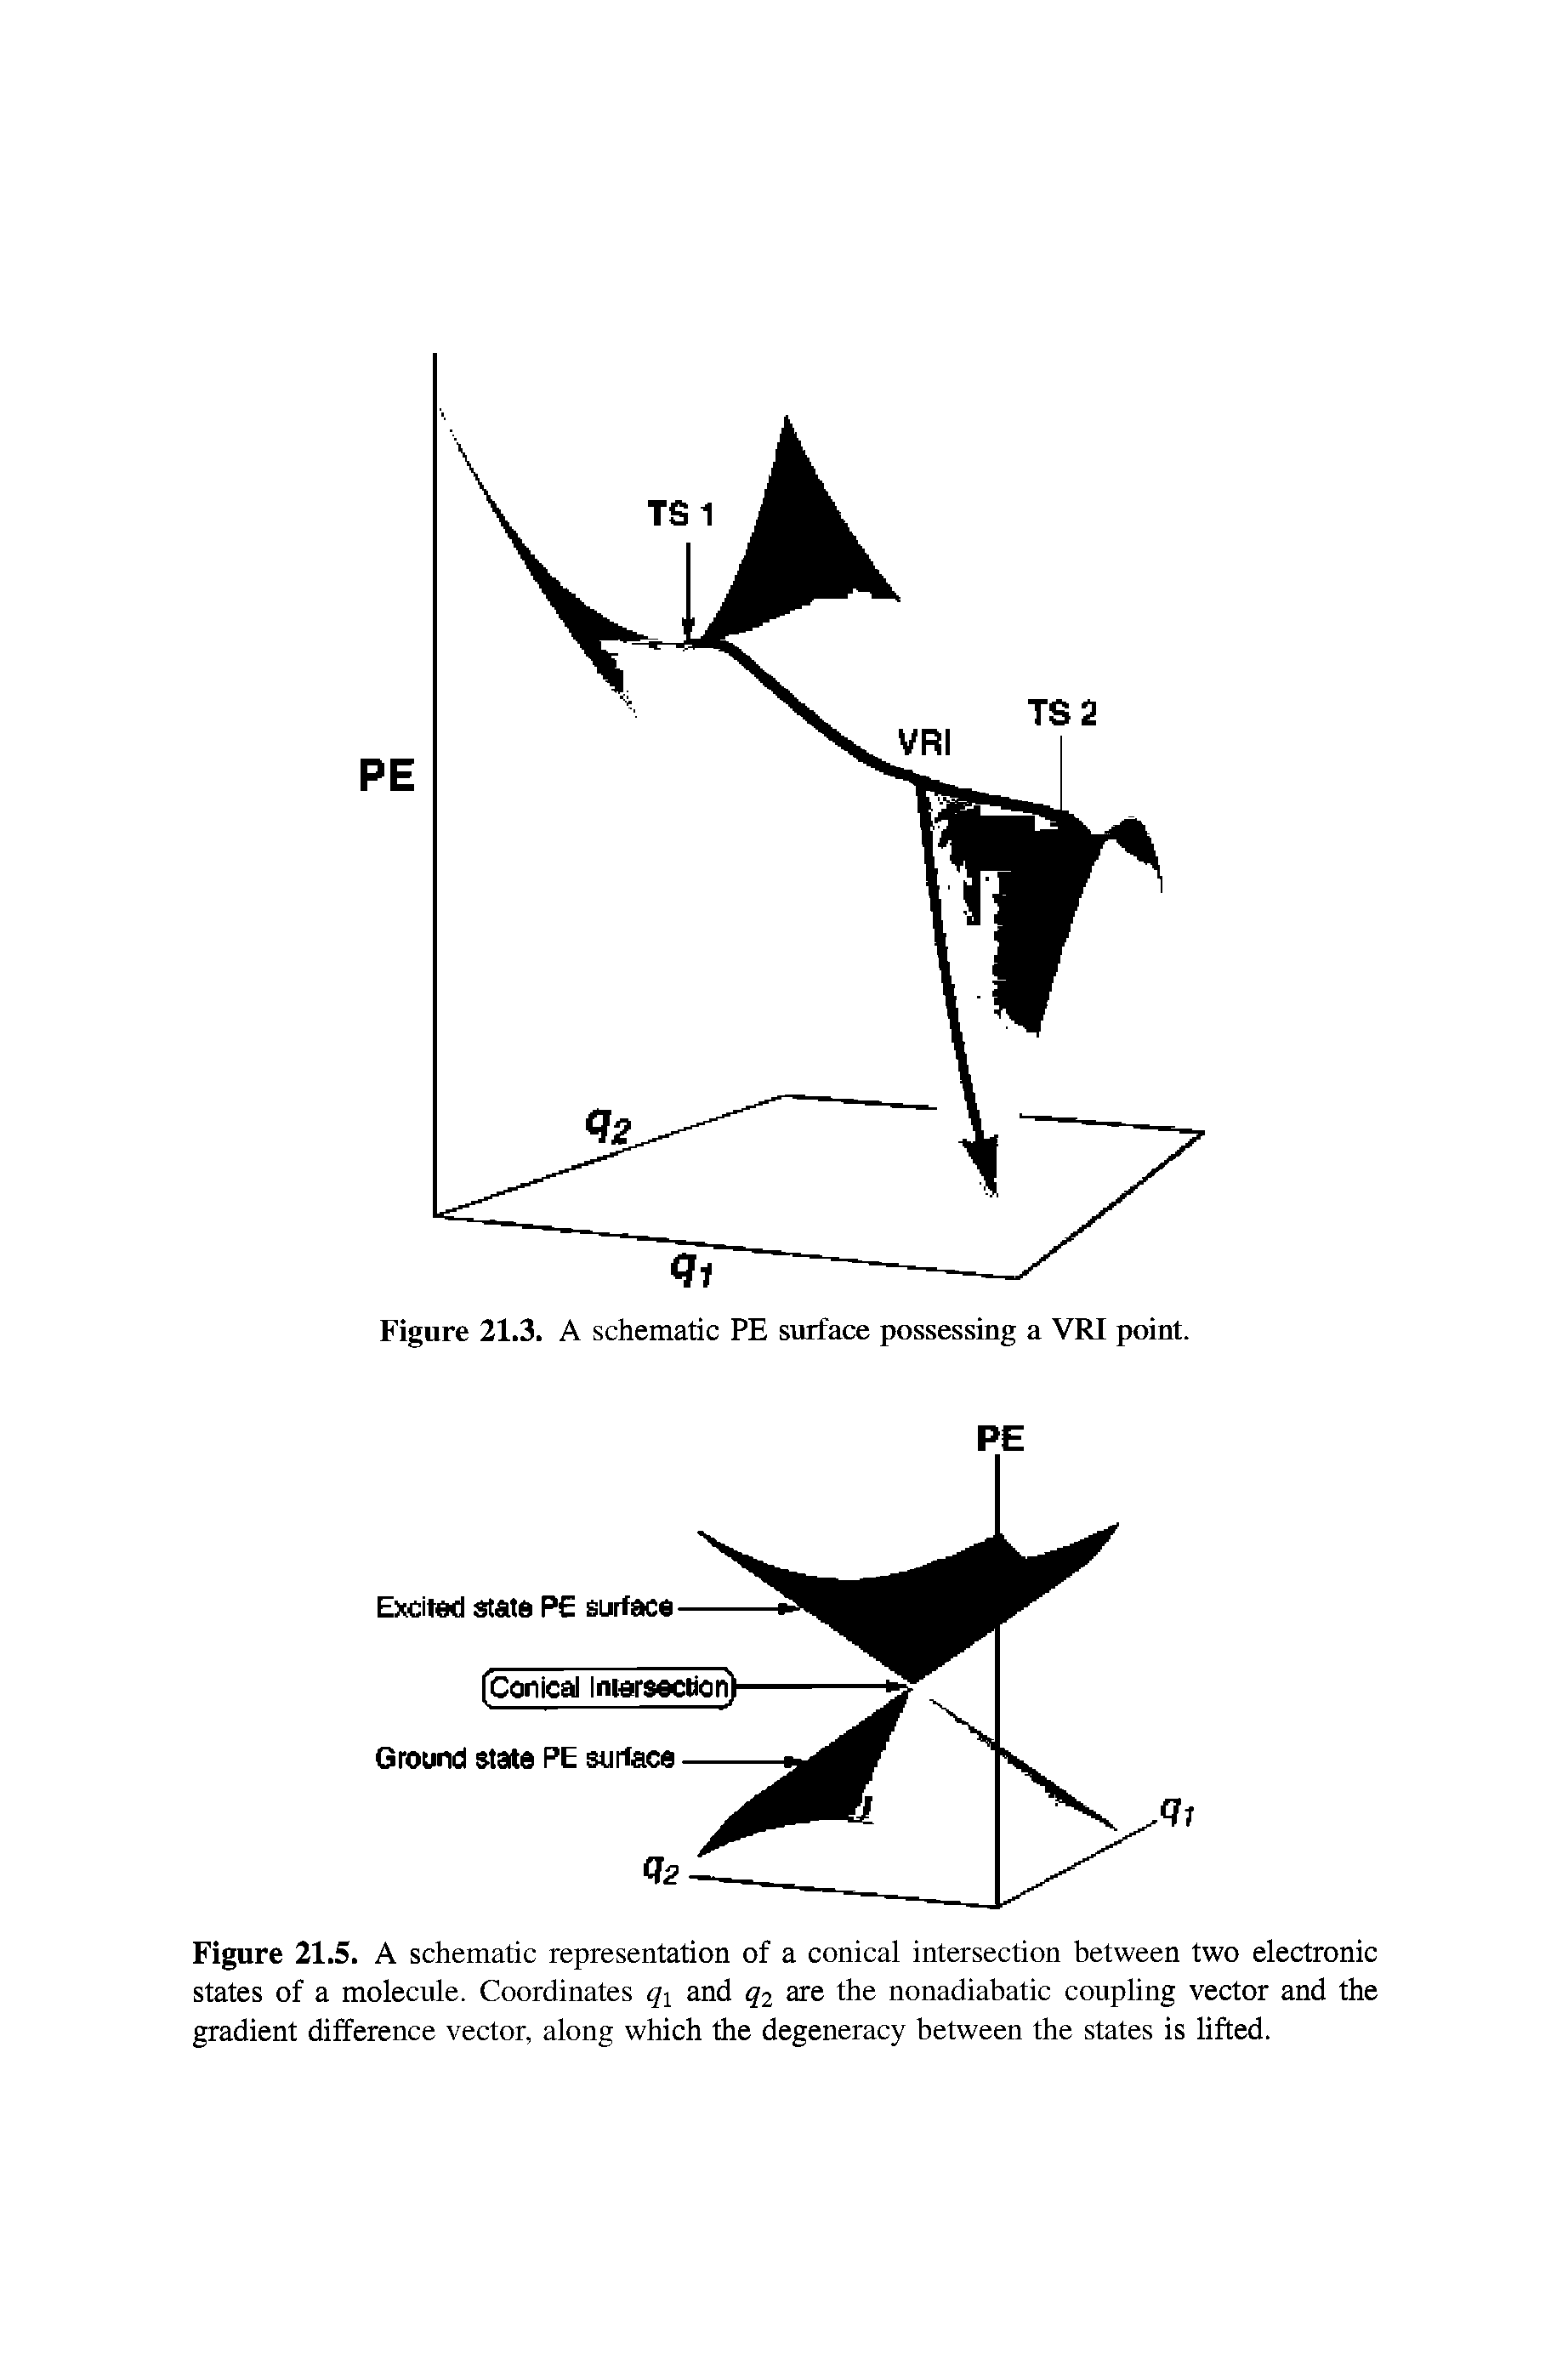 Figure 21.5. A schematic representation of a conical intersection between two electronic states of a molecule. Coordinates qi and 52 ars the nonadiahatic coupling vector and the gradient difference vector, along which the degeneracy between the states is lifted.